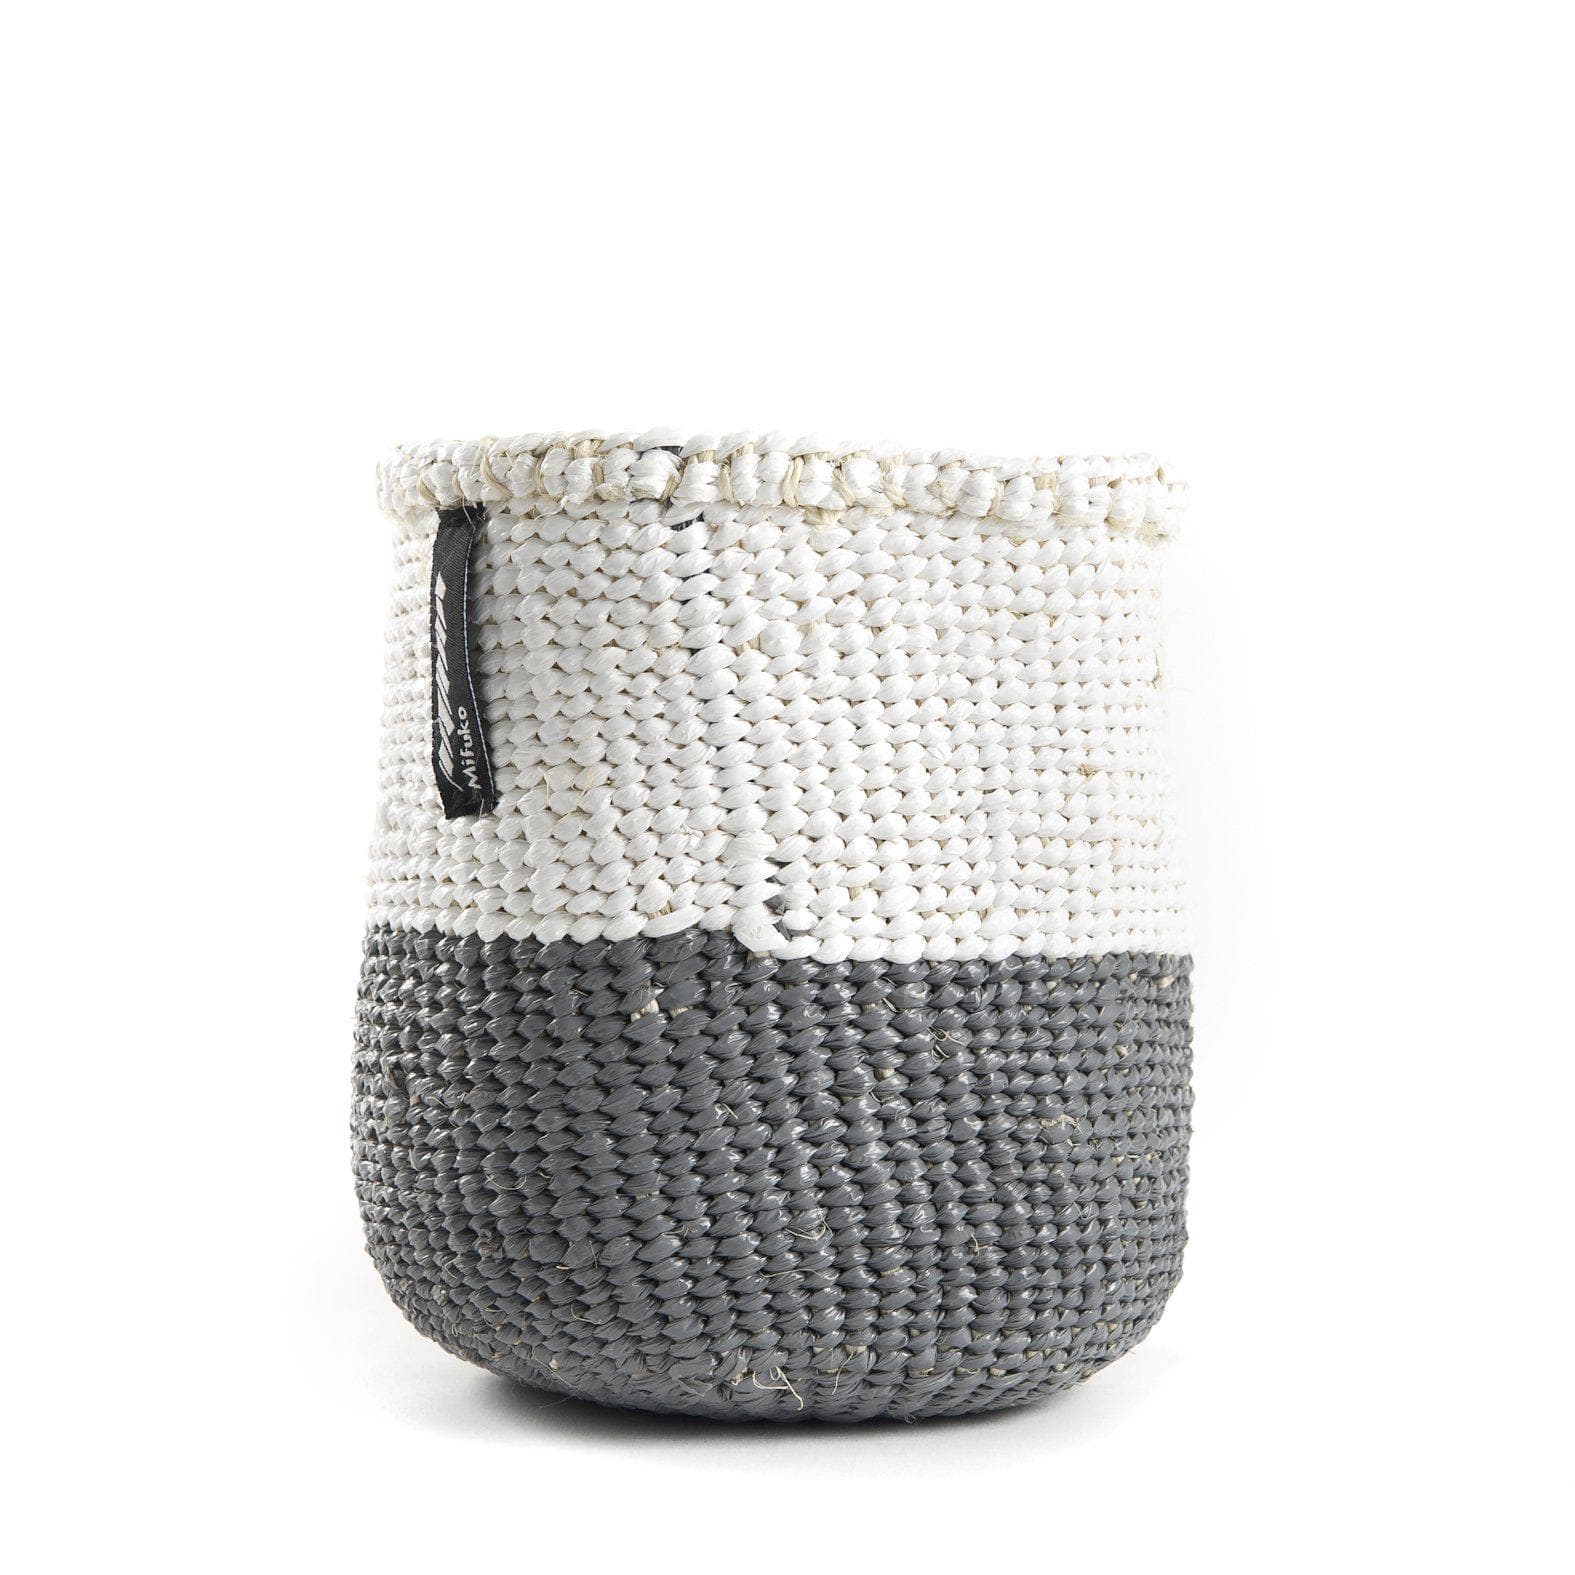 Mifuko Partly recycled plastic and sisal Small basket XS Kiondo basket | White and grey duo XS